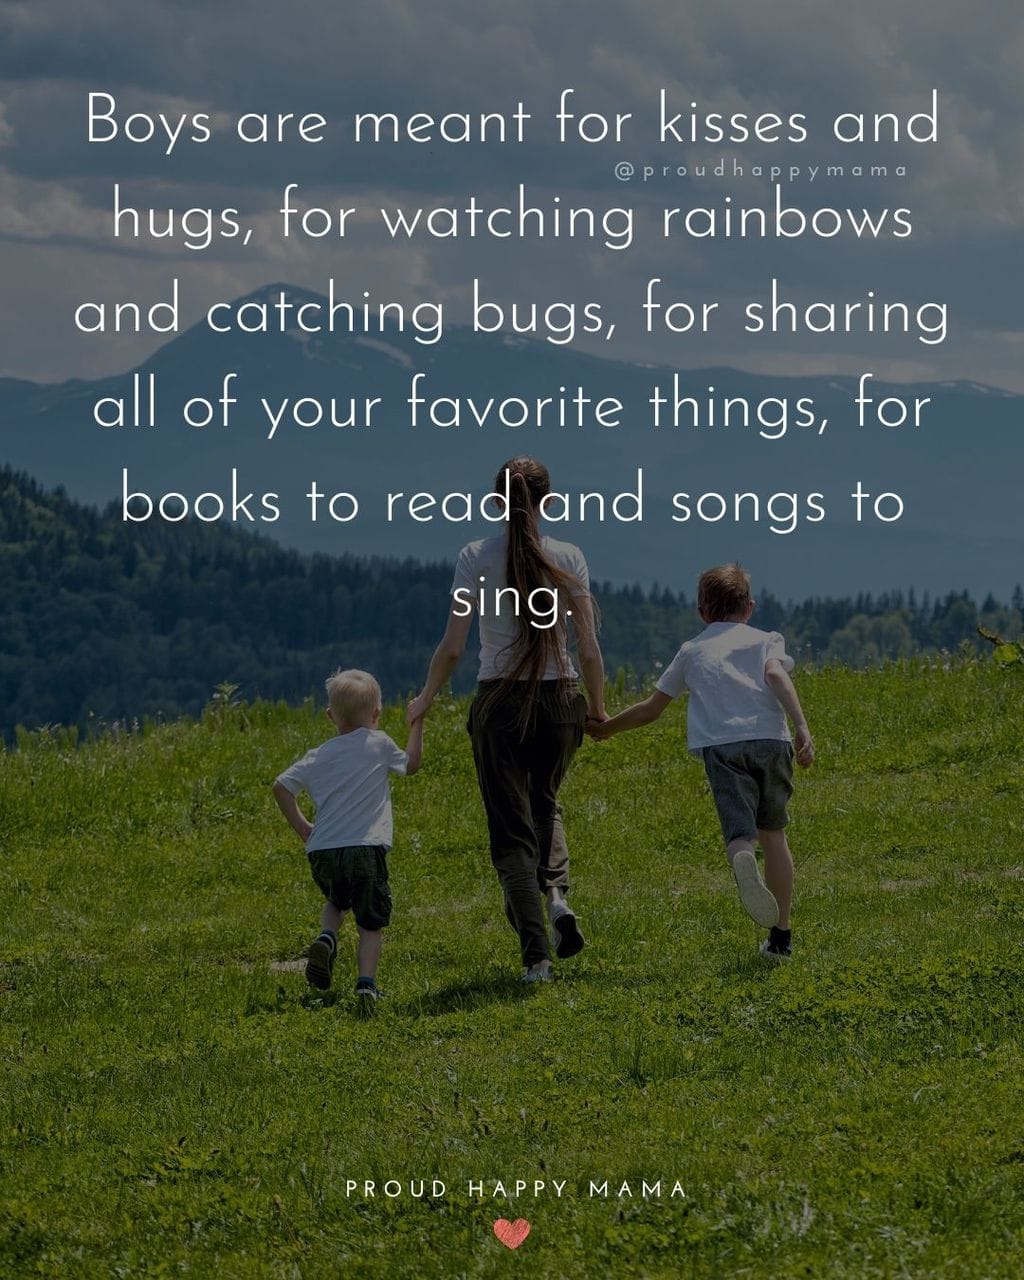 Boy Mom Quotes - Boys are meant for kisses and hugs, for watching rainbows and catching bugs, for sharing all of your favorite things, for books to read and songs to sing.